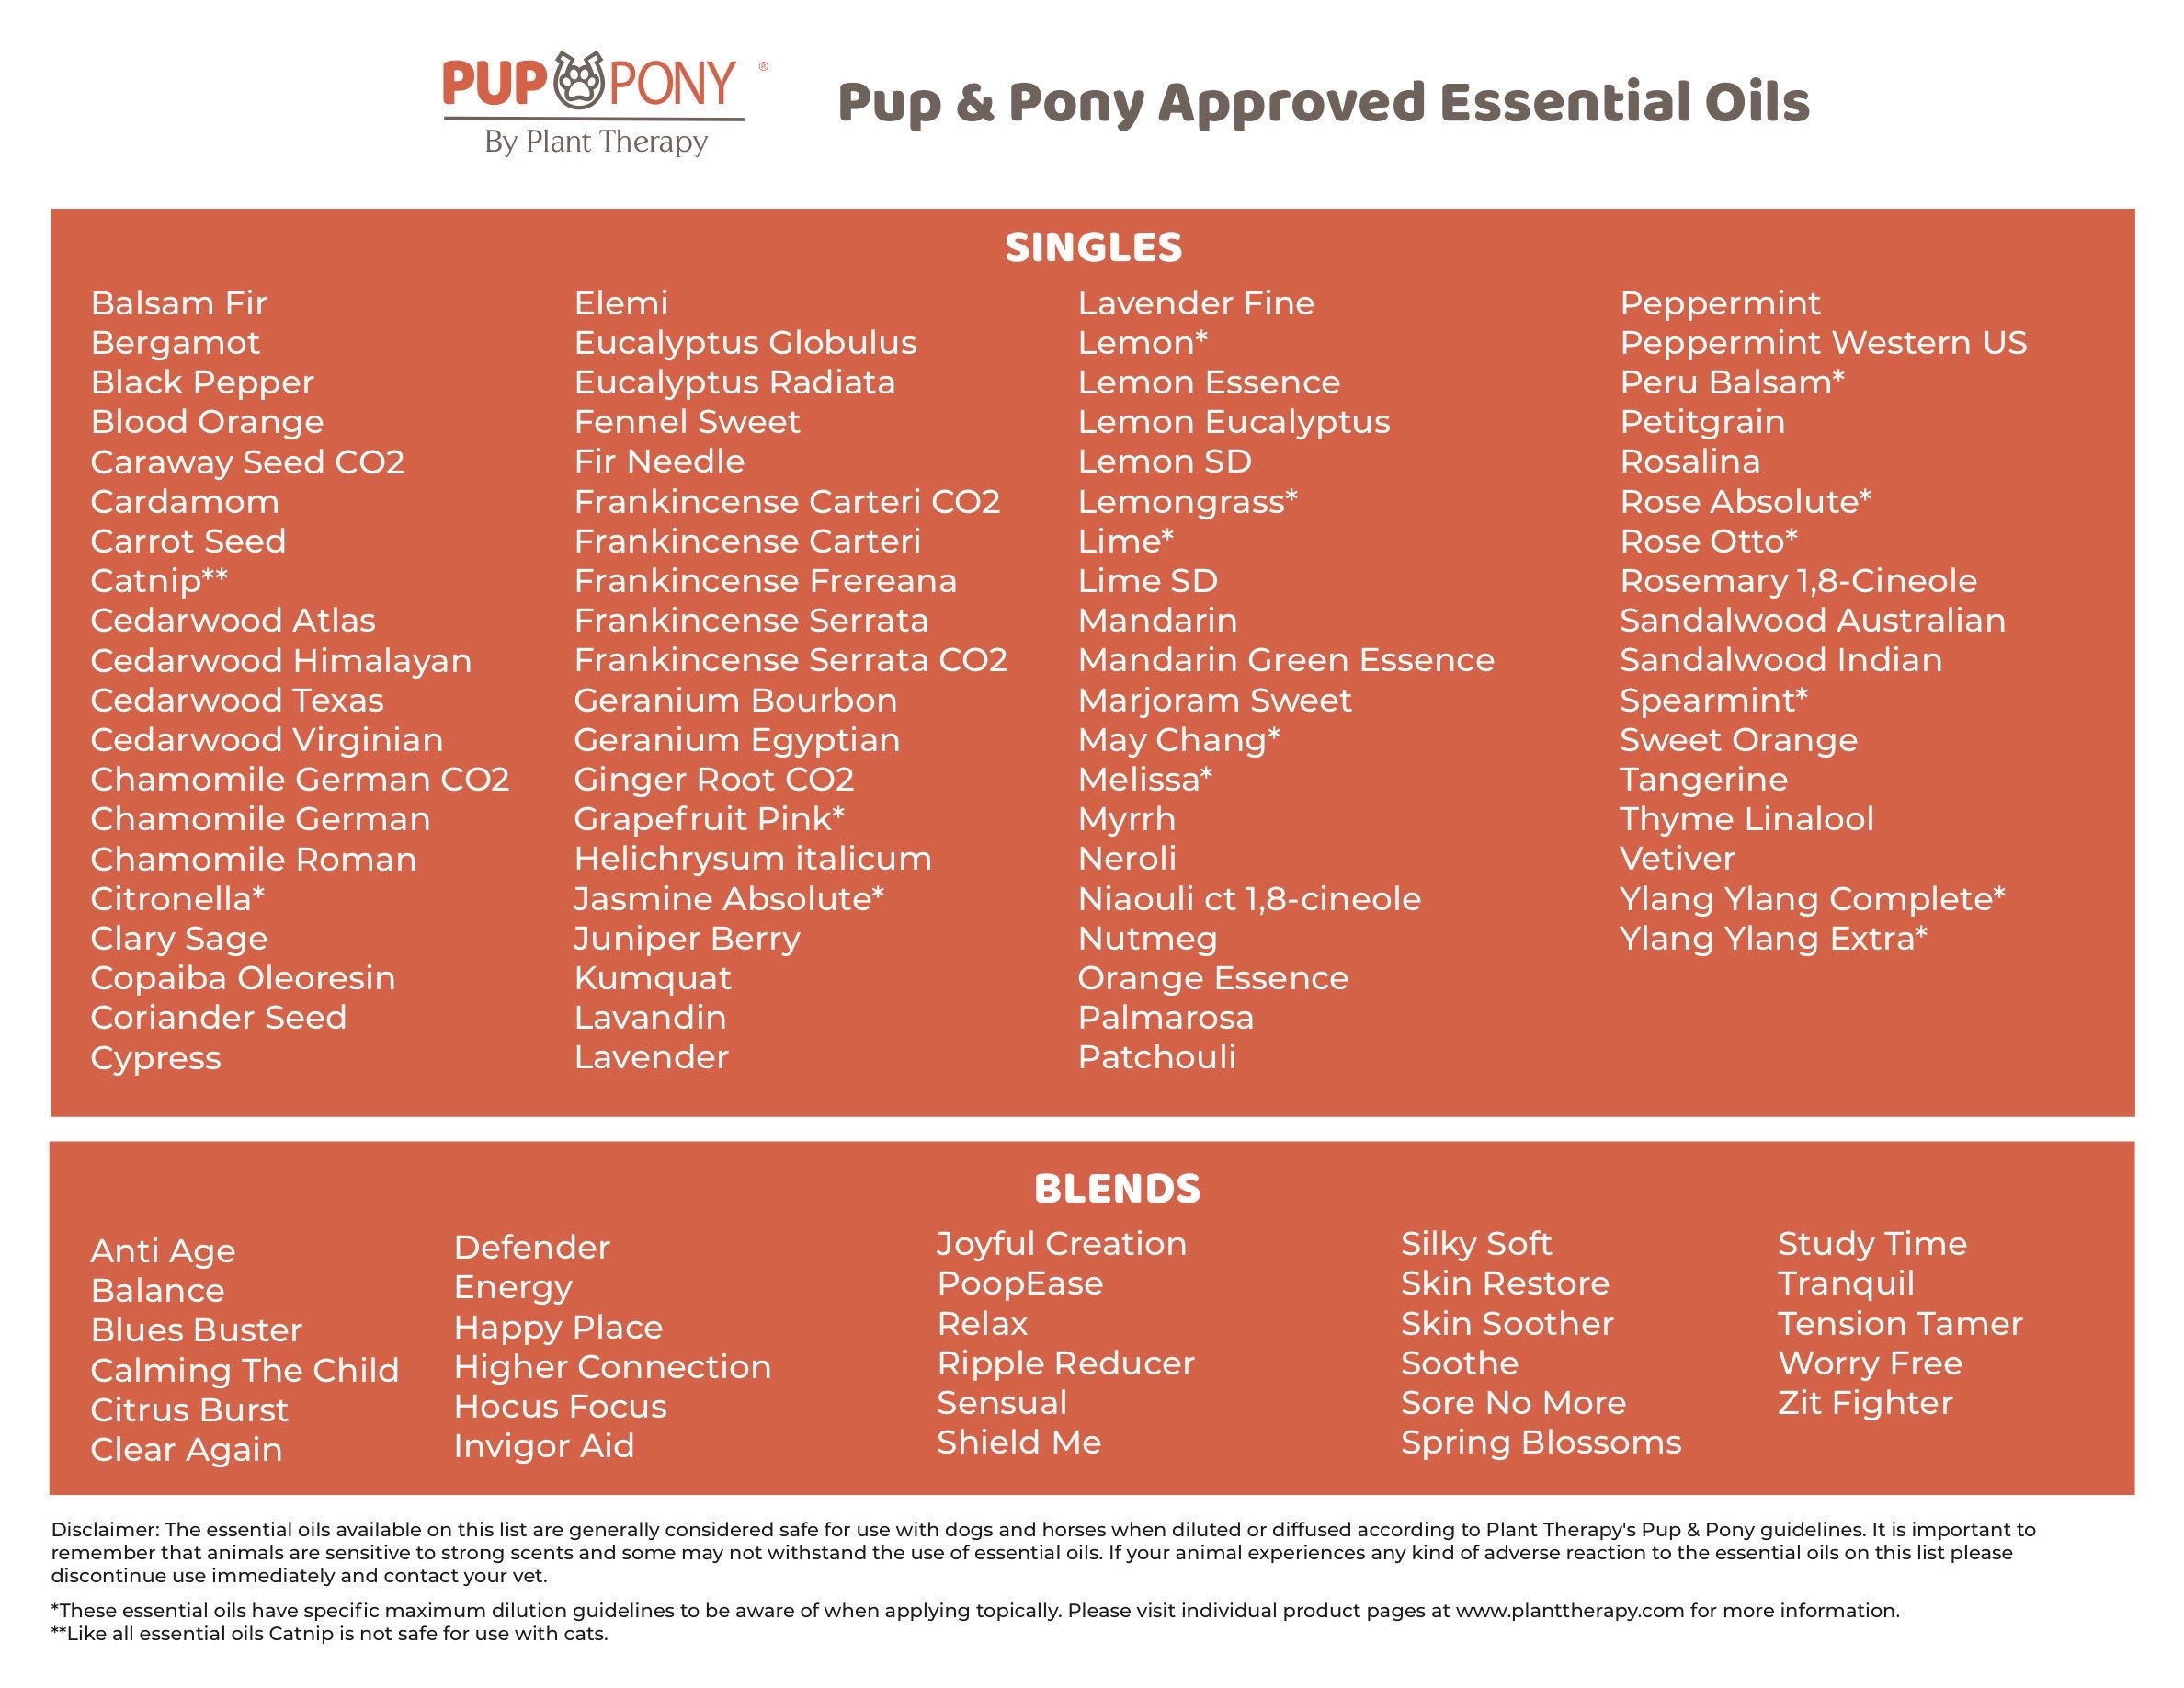 Pup & Pony Approved Essential Oils 2.jpg